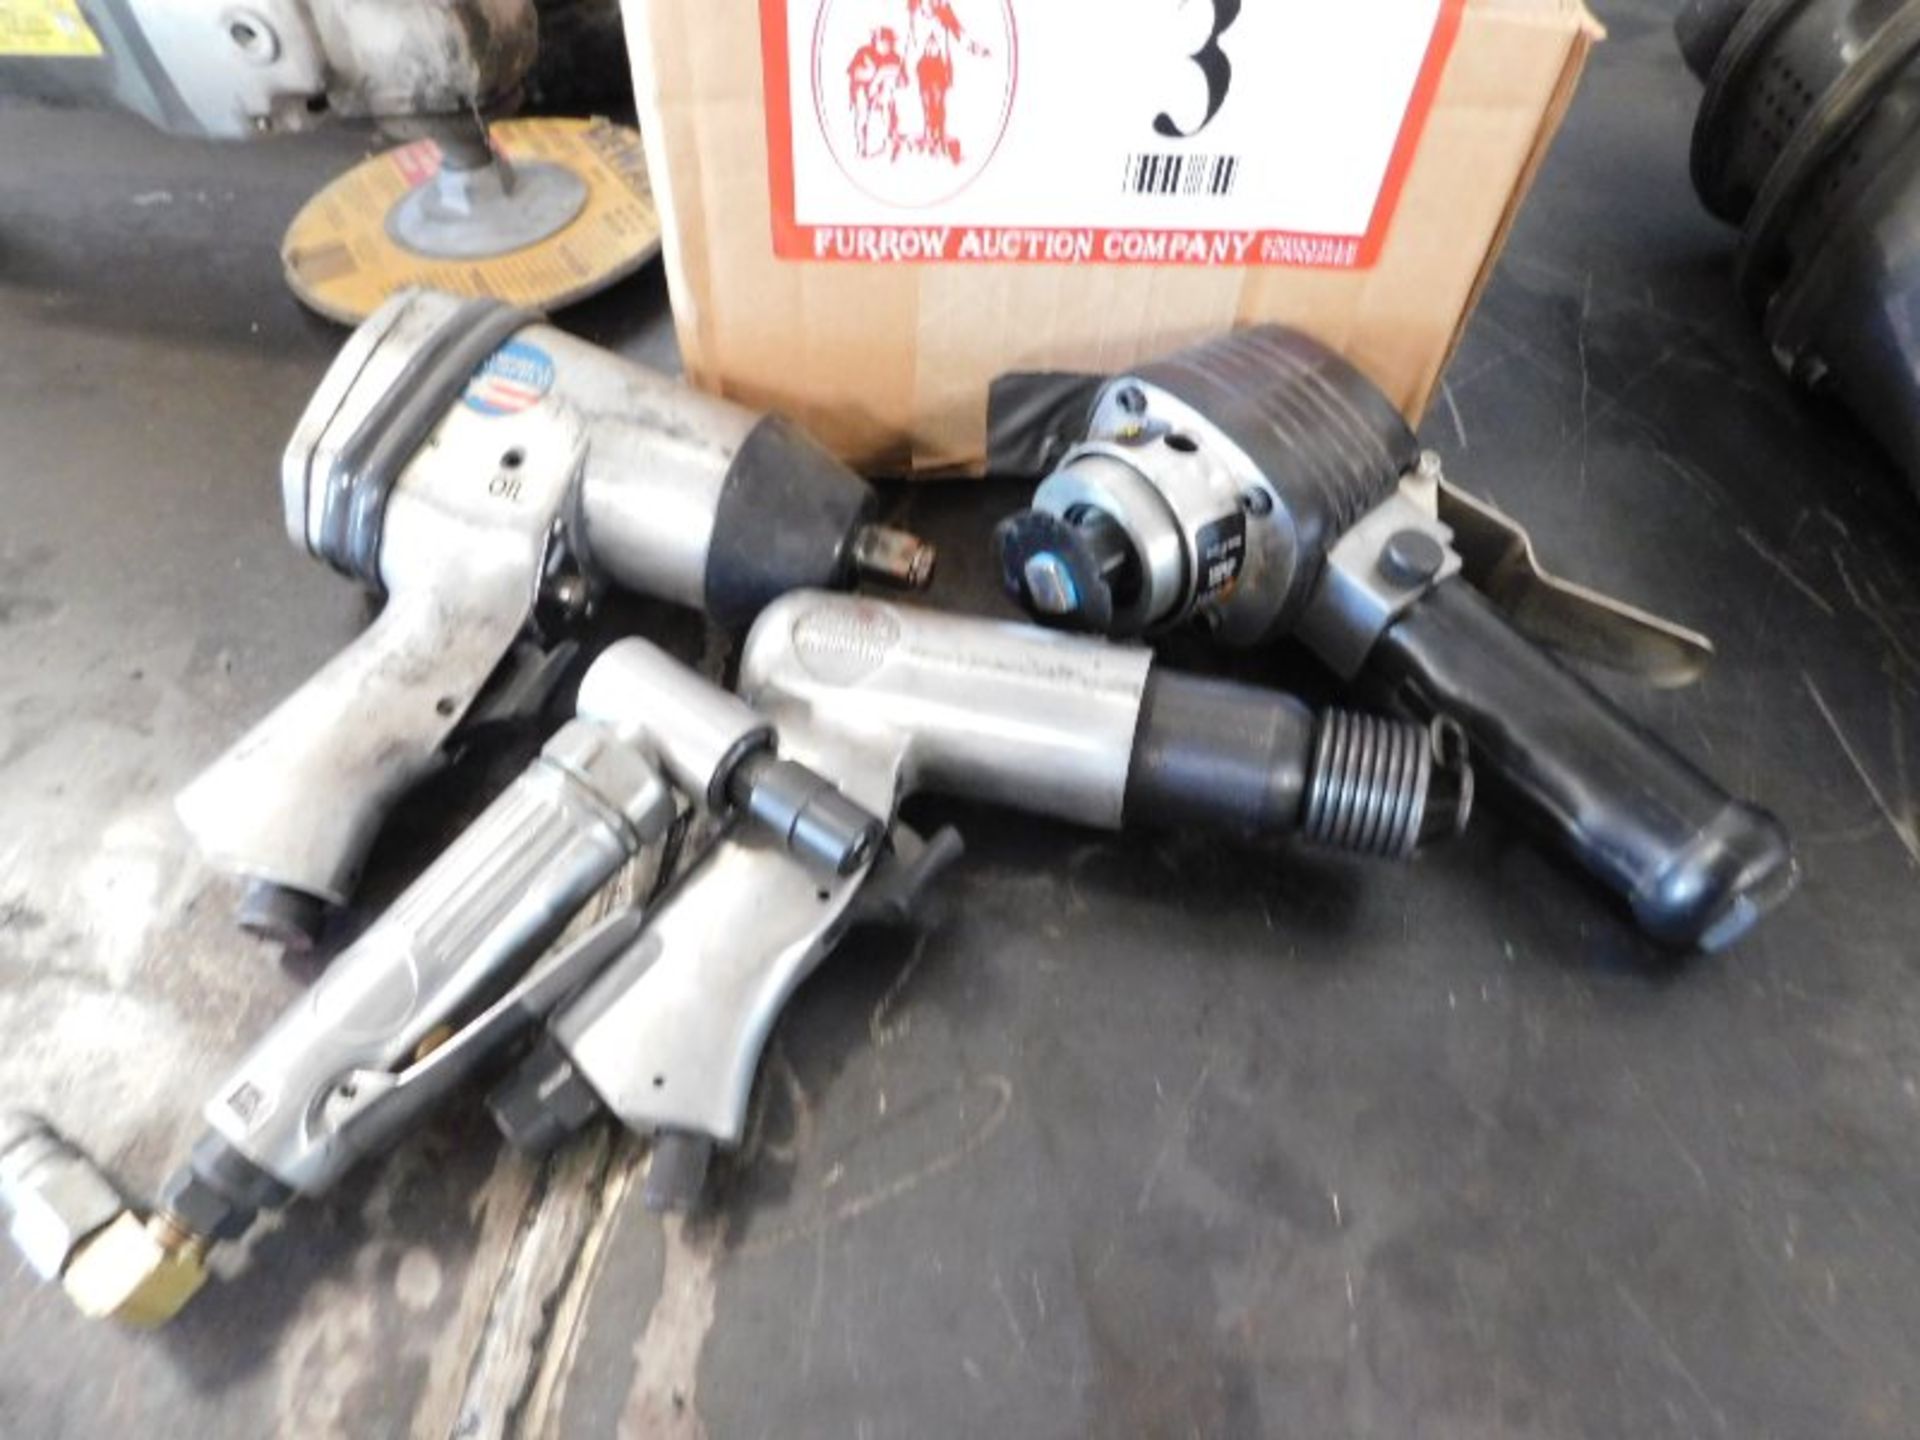 (7) Pneumatic Tools, Campbell Hausfeld 1/2" Drive Impact Wrench, (2) Chisels, Dual Action Sander, - Image 2 of 2